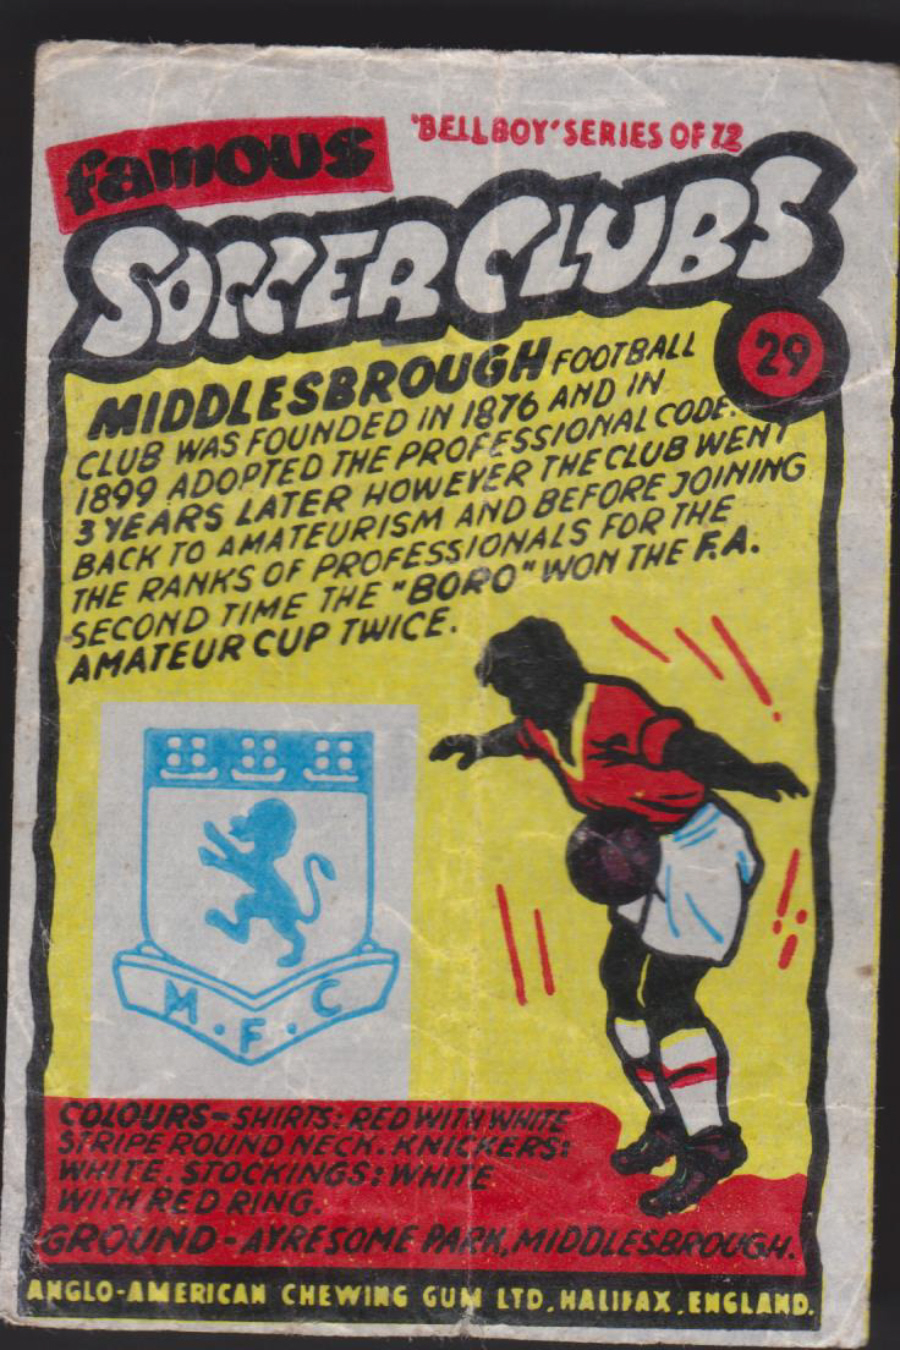 Anglo-American-Chewing-Gum-Wax-Wrapper-Famous-Soccer-Clubs-No-29 - Middlesbrough